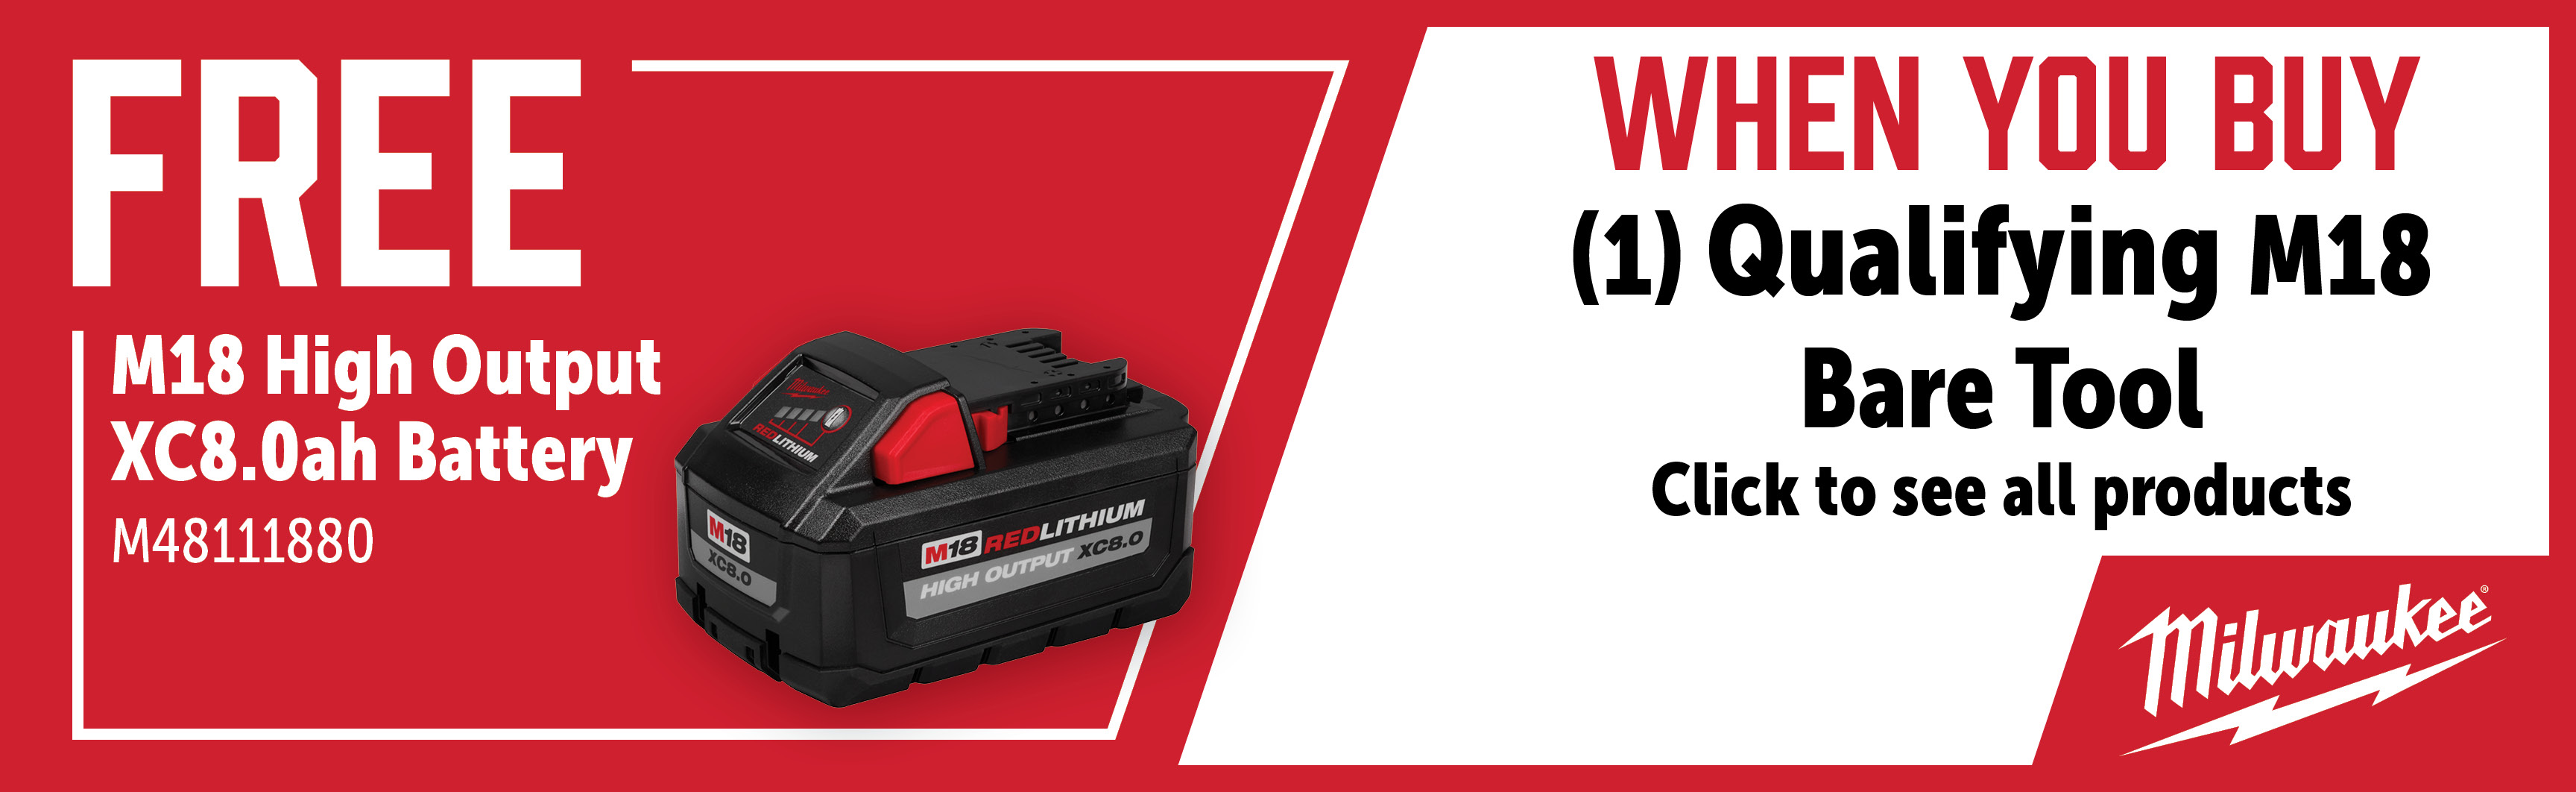 Milwaukee Feb-Apr: Buy a Qualifying M18 Fuel Bare Tool and Get a FREE M48111880